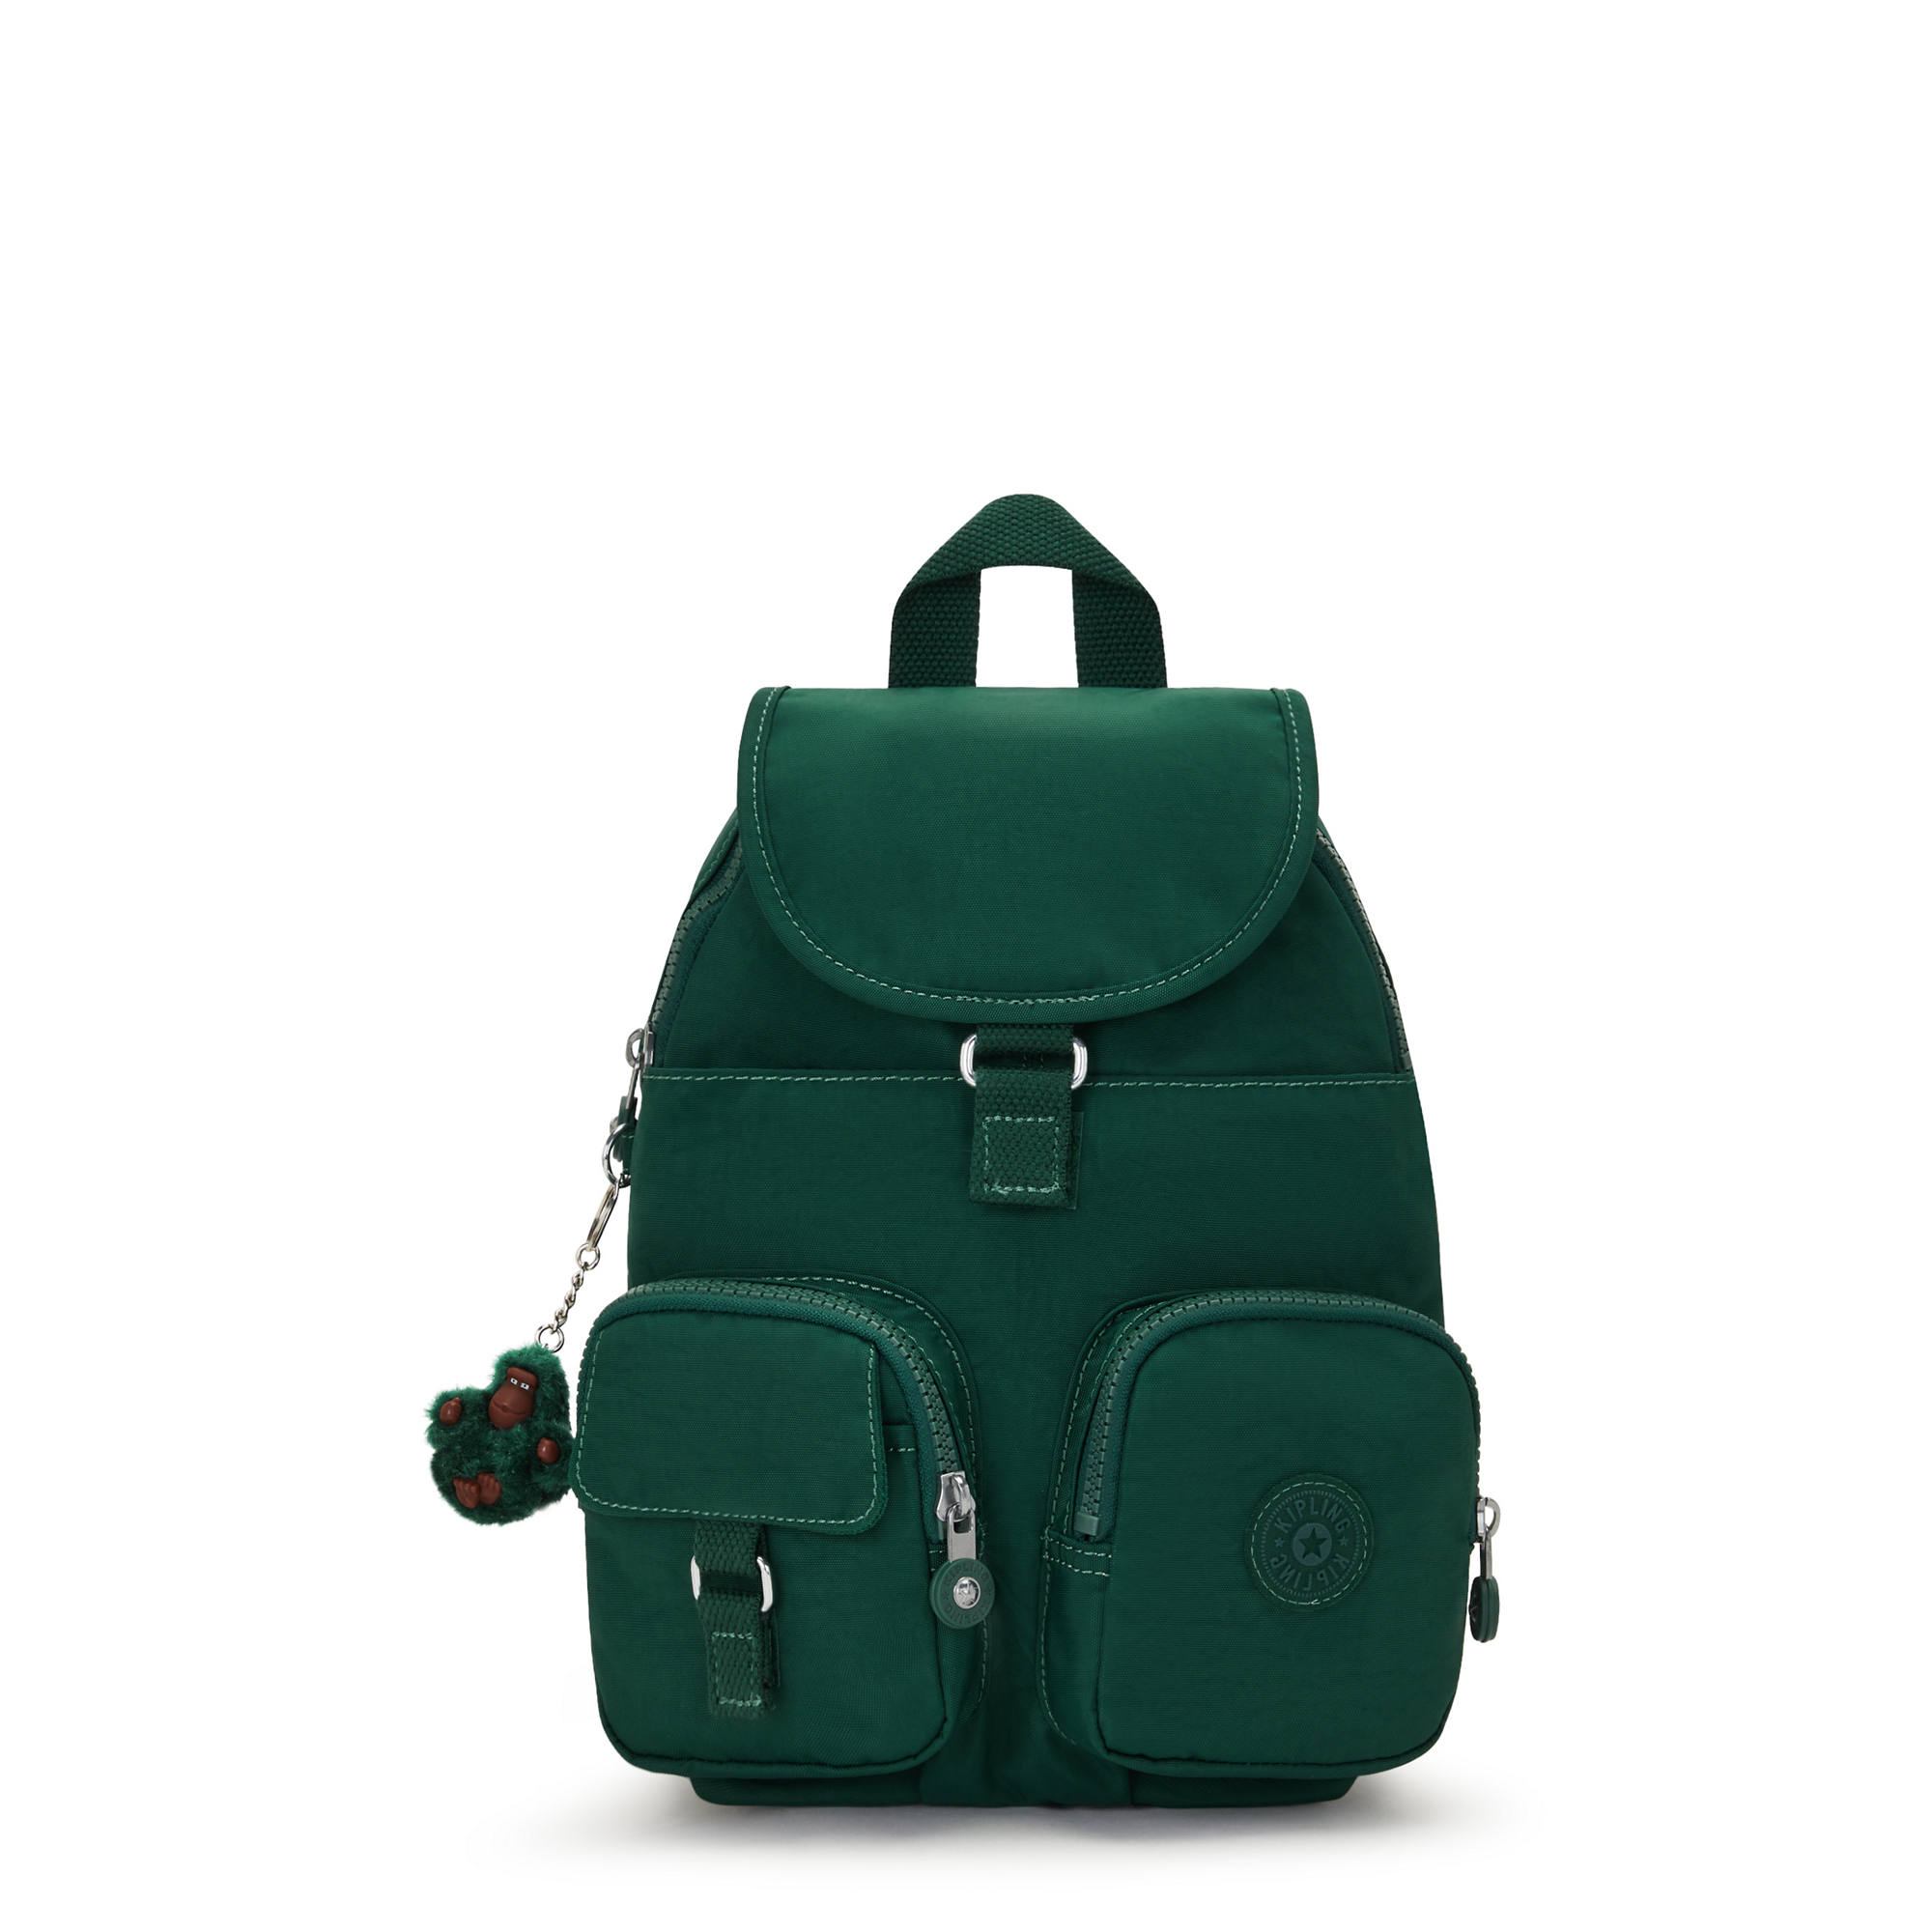 Plain PU Green Backpack at best price in Gurgaon | ID: 21854645073